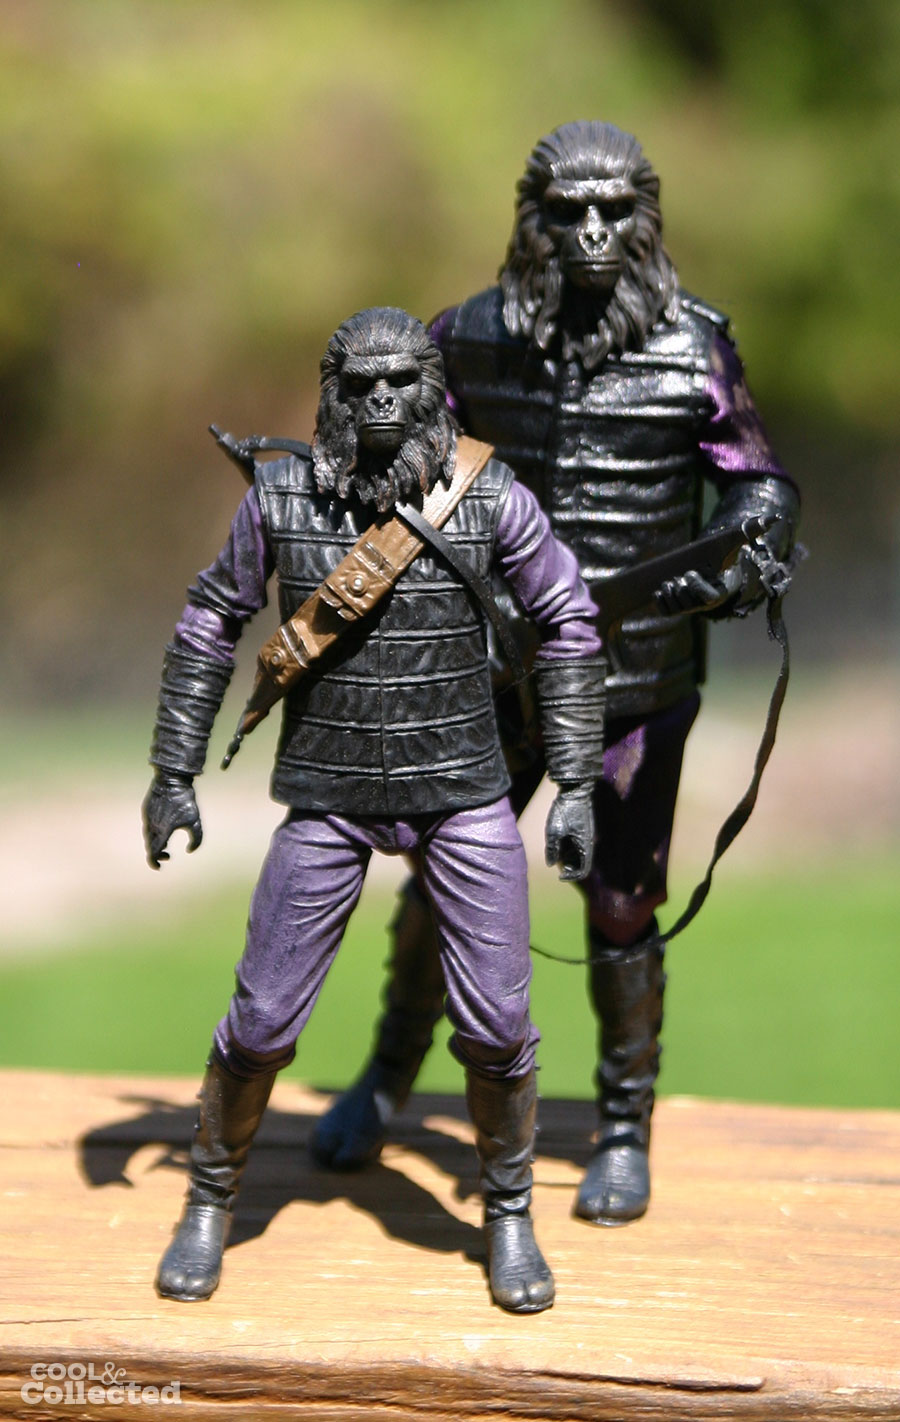 PLANET OF THE APES Gorilla Soldier 8" NECA Deluxe Cloth Action Figure NEW Mego 